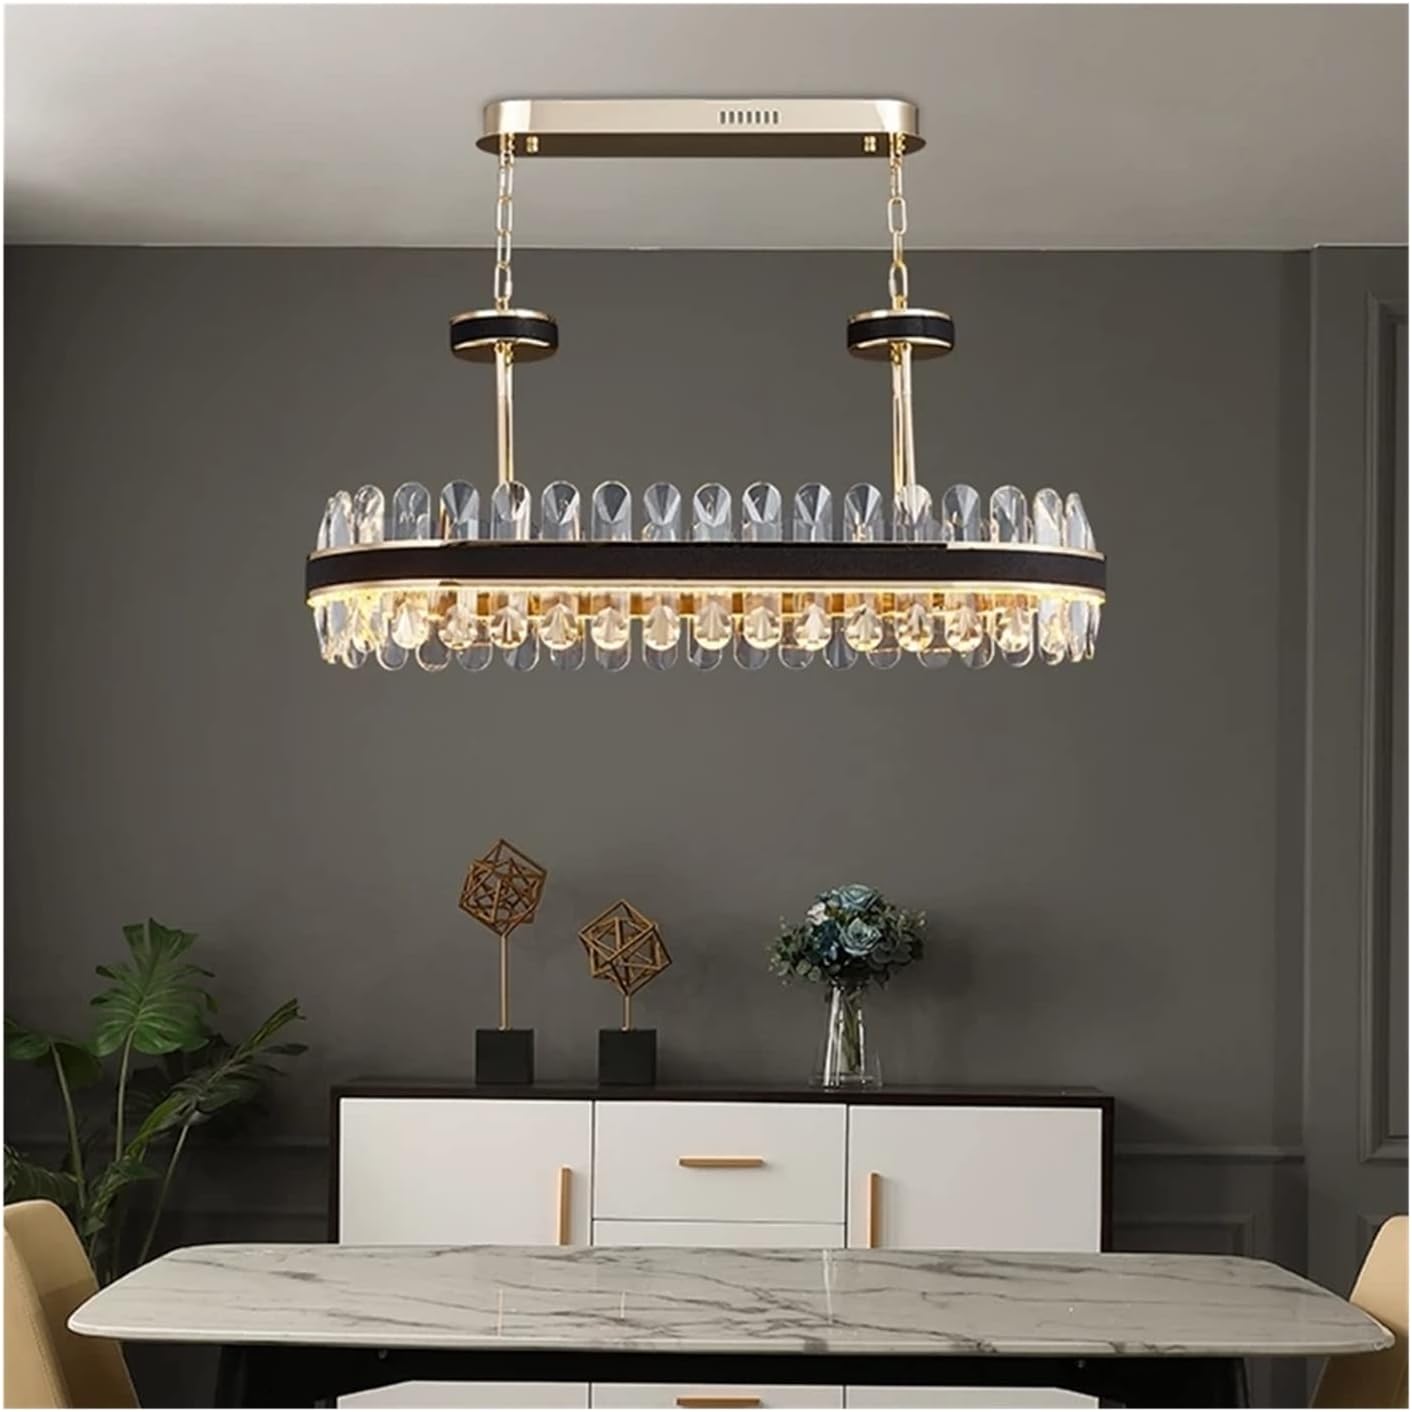 Buy Modern Oval LED Black & Gold Crystal Ceiling Pendant Chandelier 75cm - BH3009/OVAL | Shop at Supply Master Accra, Ghana Lamps & Lightings Buy Tools hardware Building materials